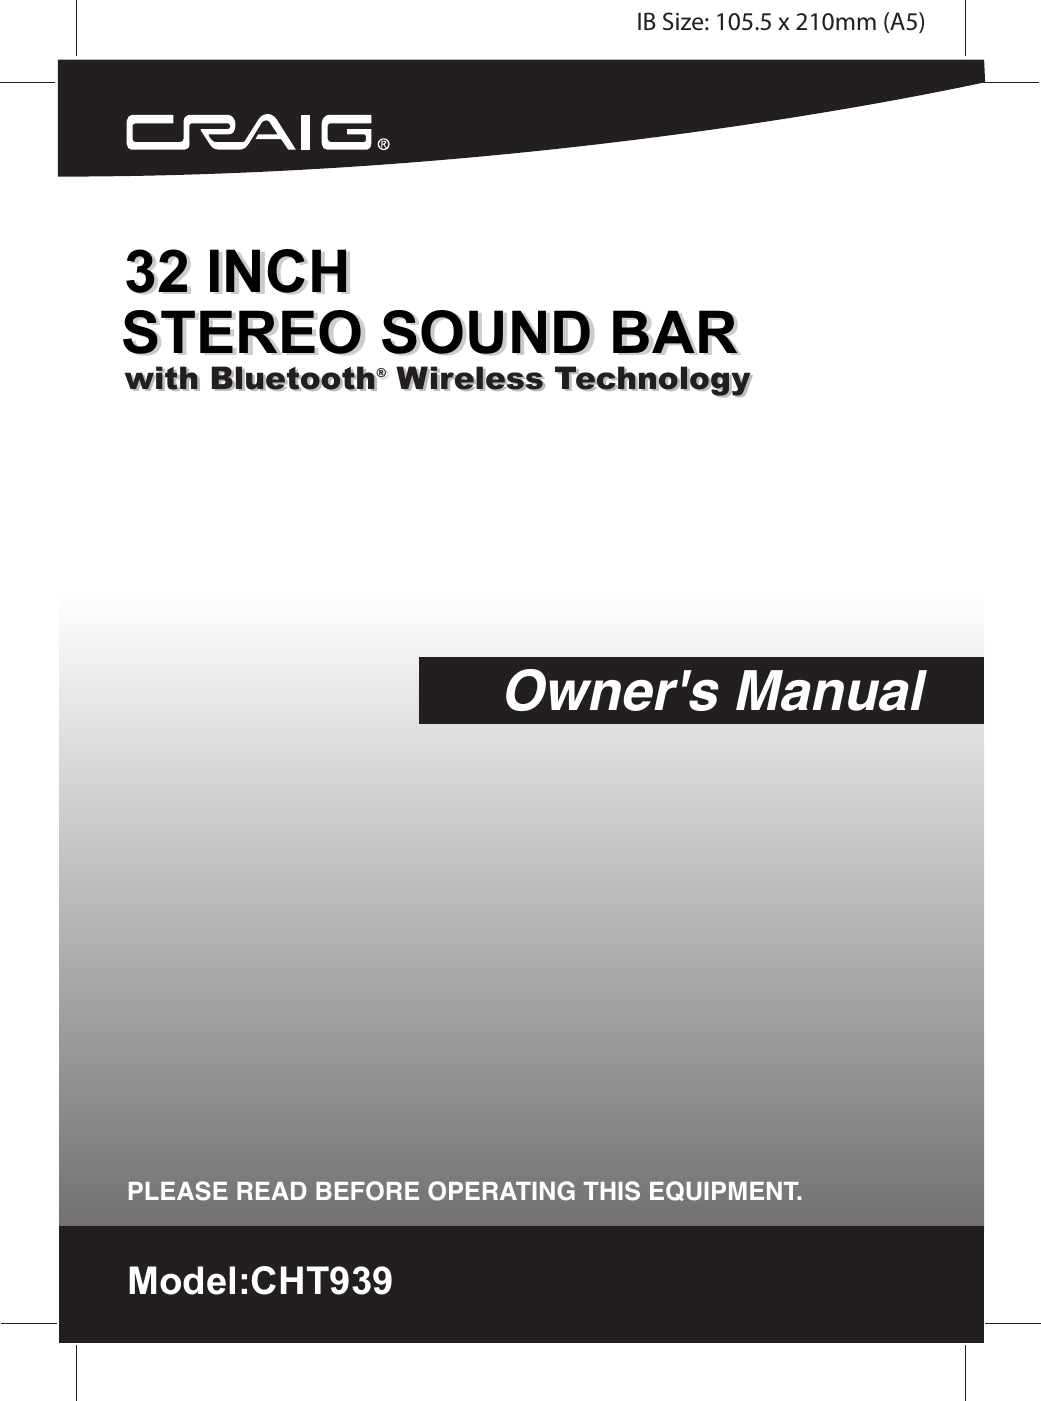 Owner&apos;s ManualPLEASE READ BEFORE OPERATING THIS EQUIPMENT.with Bluetooth® Wireless Technologywith Bluetooth® Wireless TechnologyIB Size: 105.5 x 210mm (A5)32 INCH32 INCHSTEREO SOUND BARSTEREO SOUND BARModel:CHT939